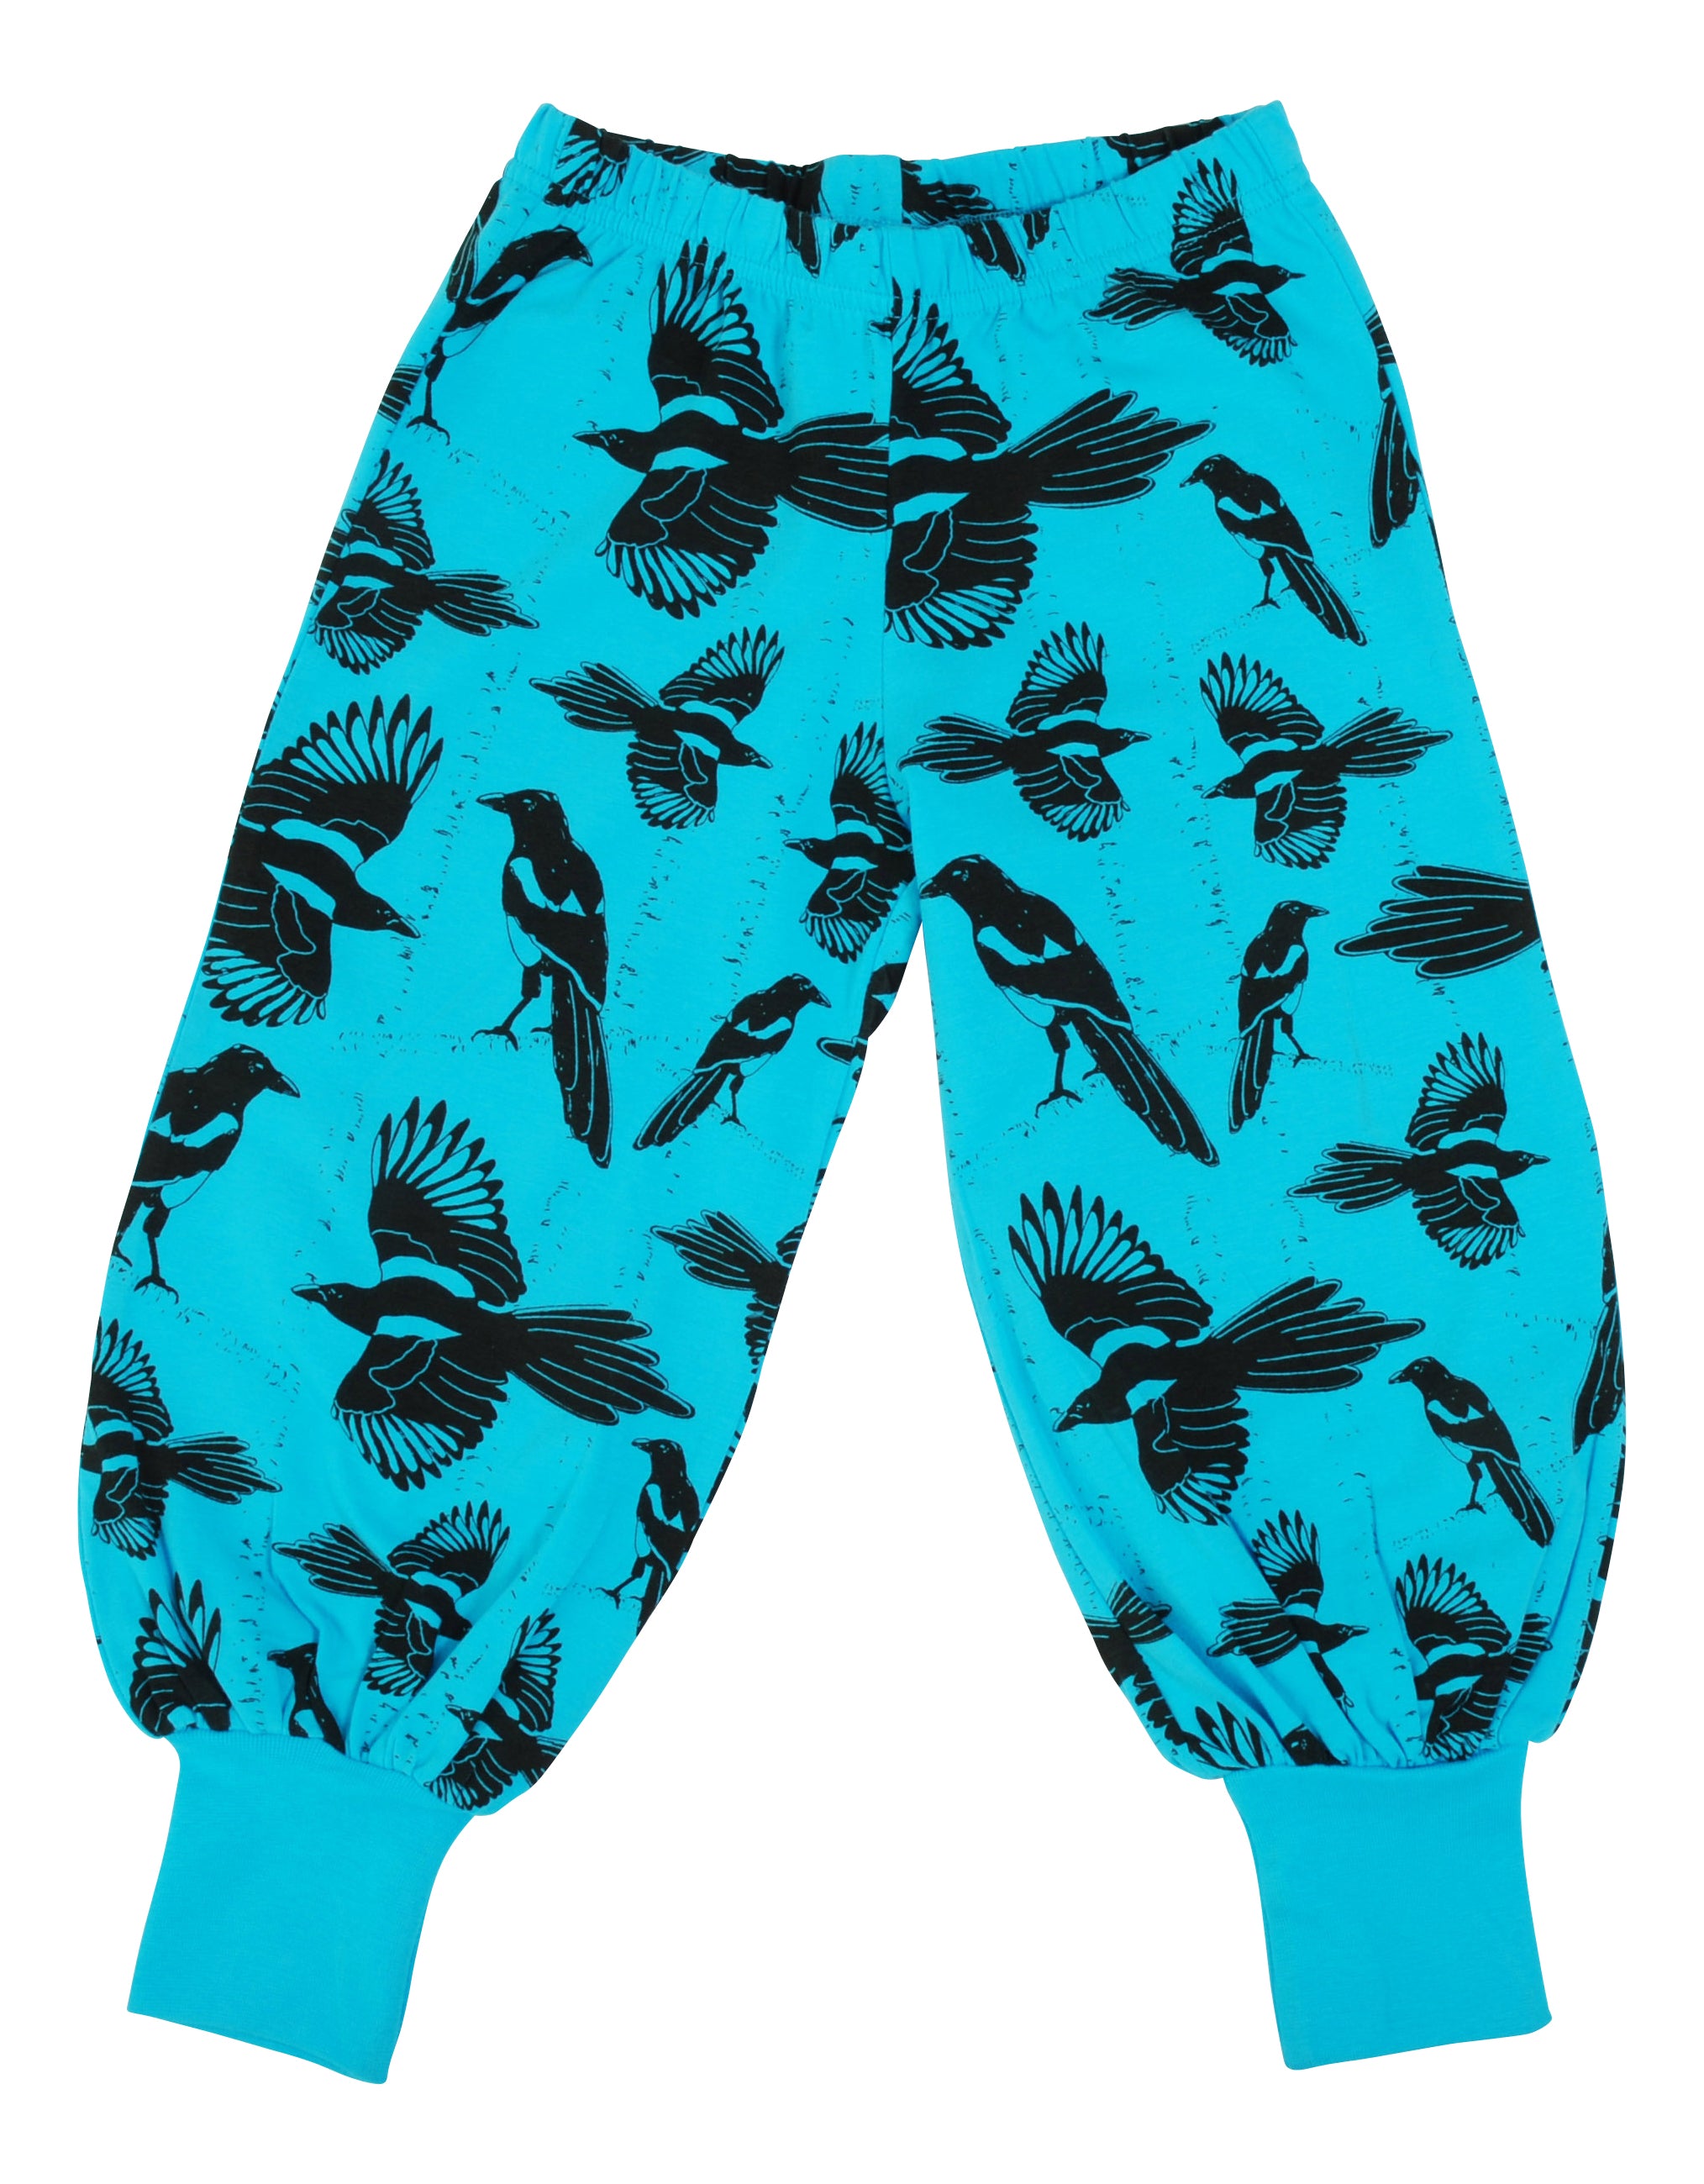 More Than A Fling - Baggy Pants - Pica Pica - Blue Atoll